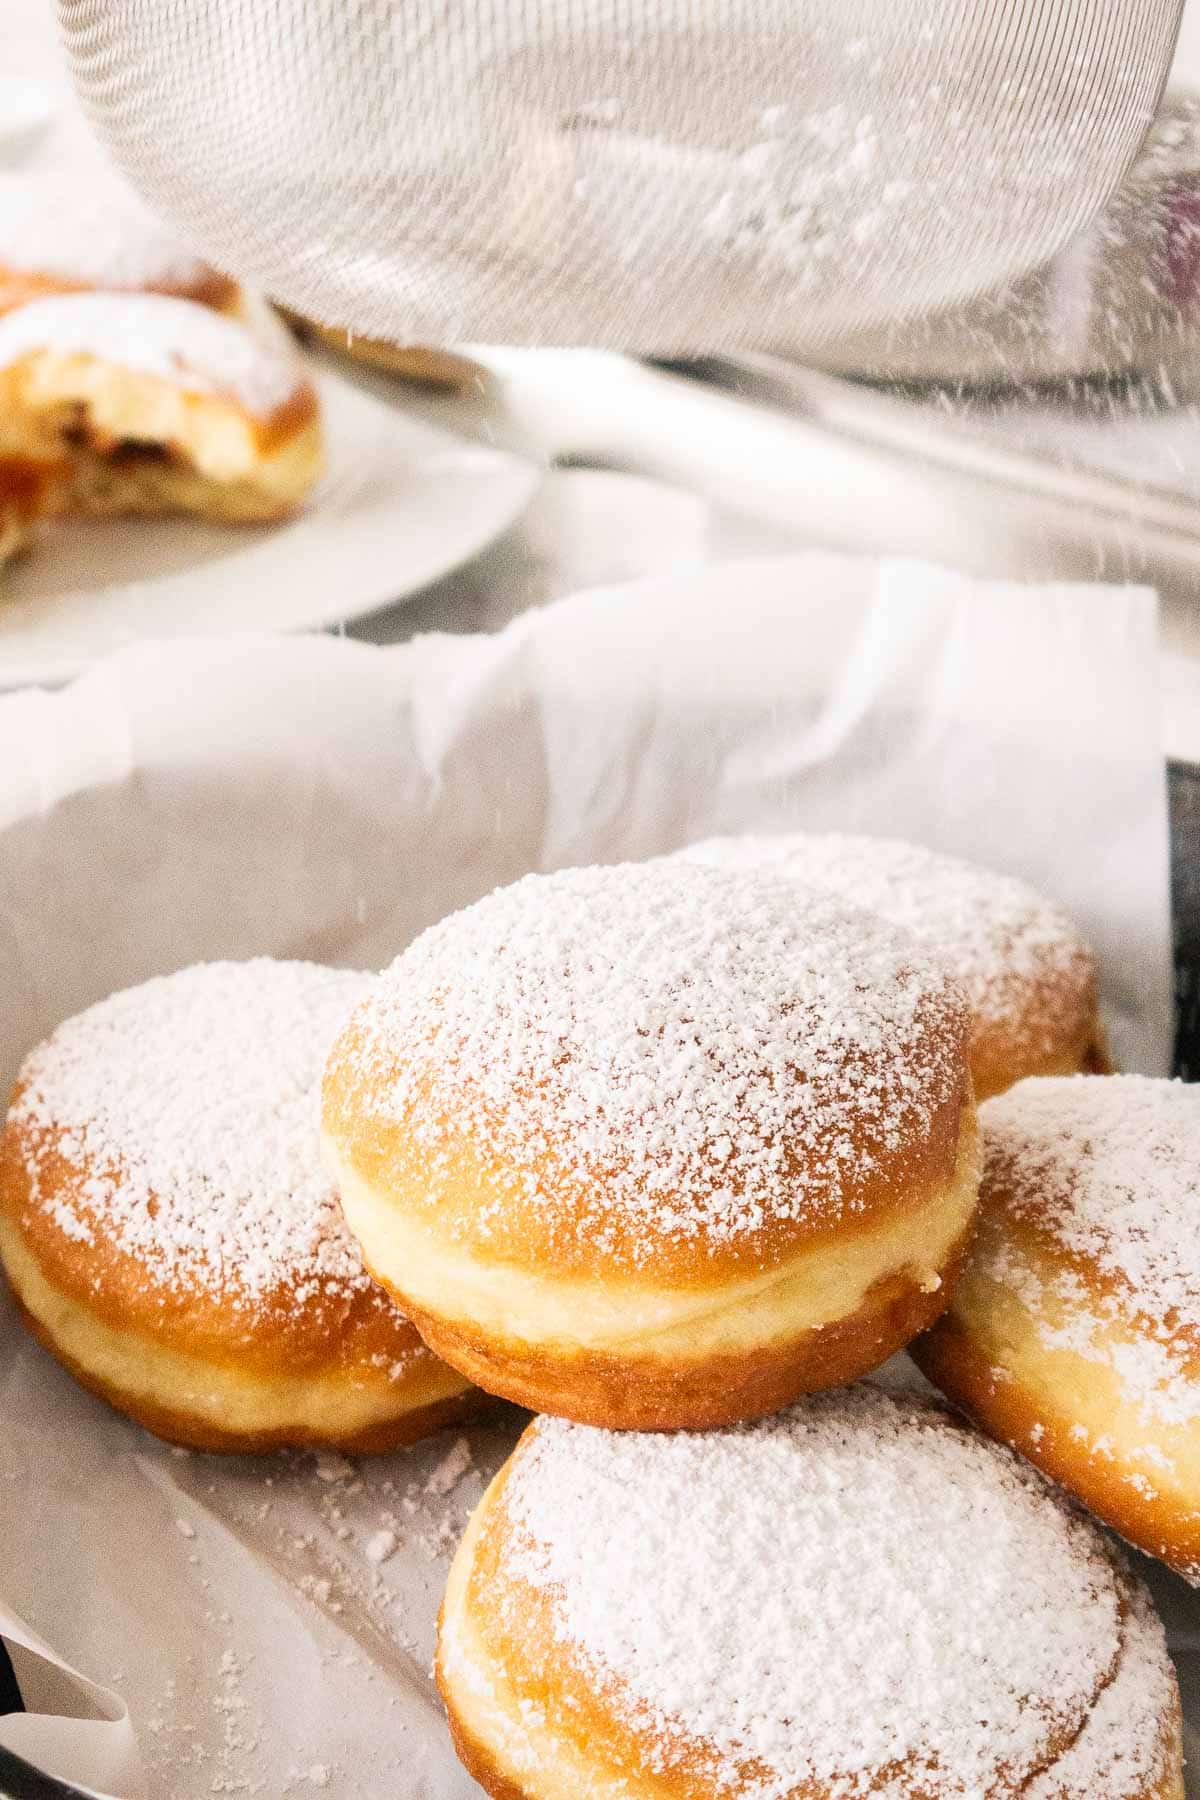 Krapfen getting dusted with powdered sugar.